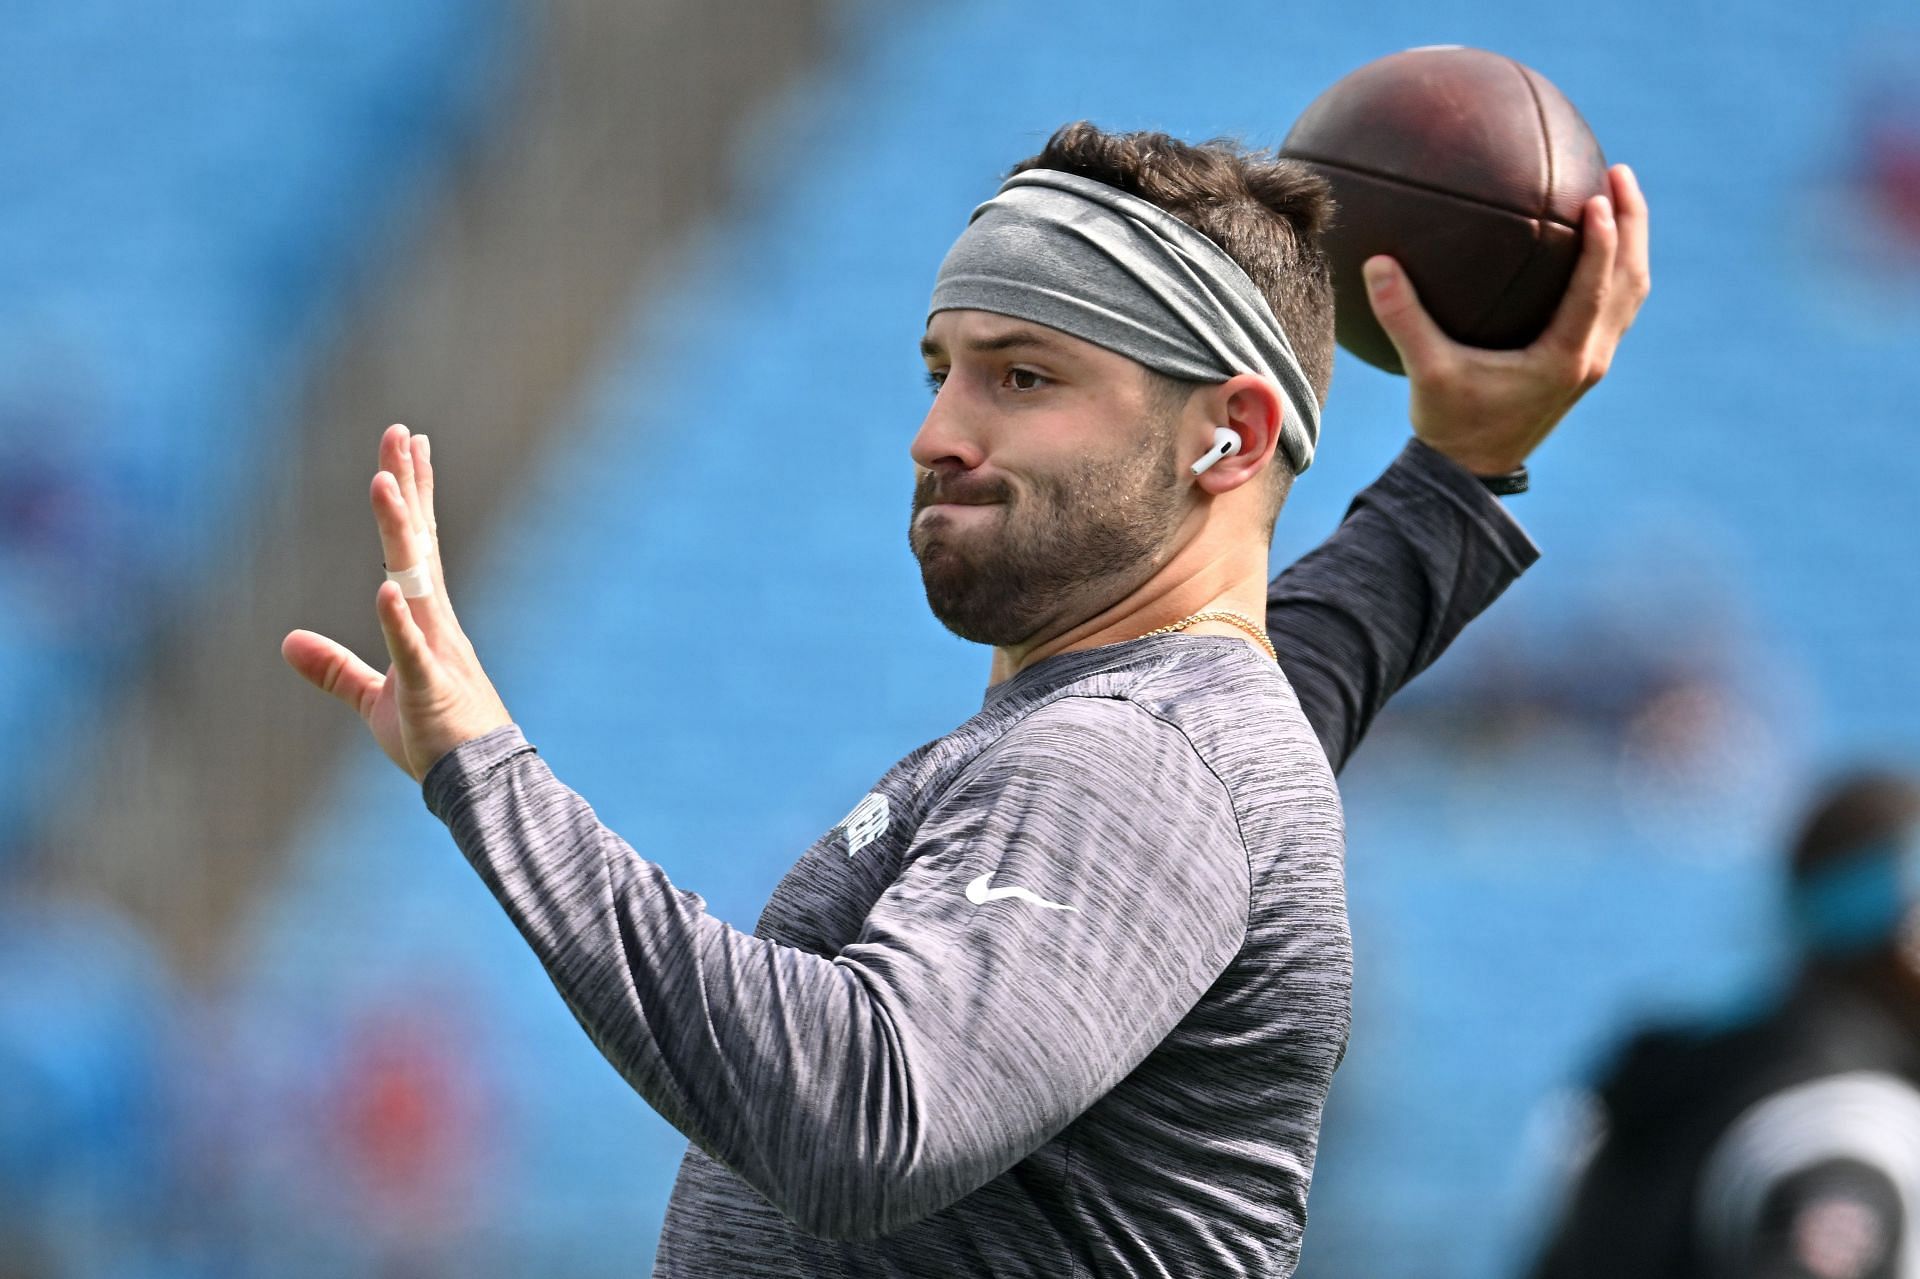 Former Carolina Panthers and Cleveland Browns quarterback Mayfield